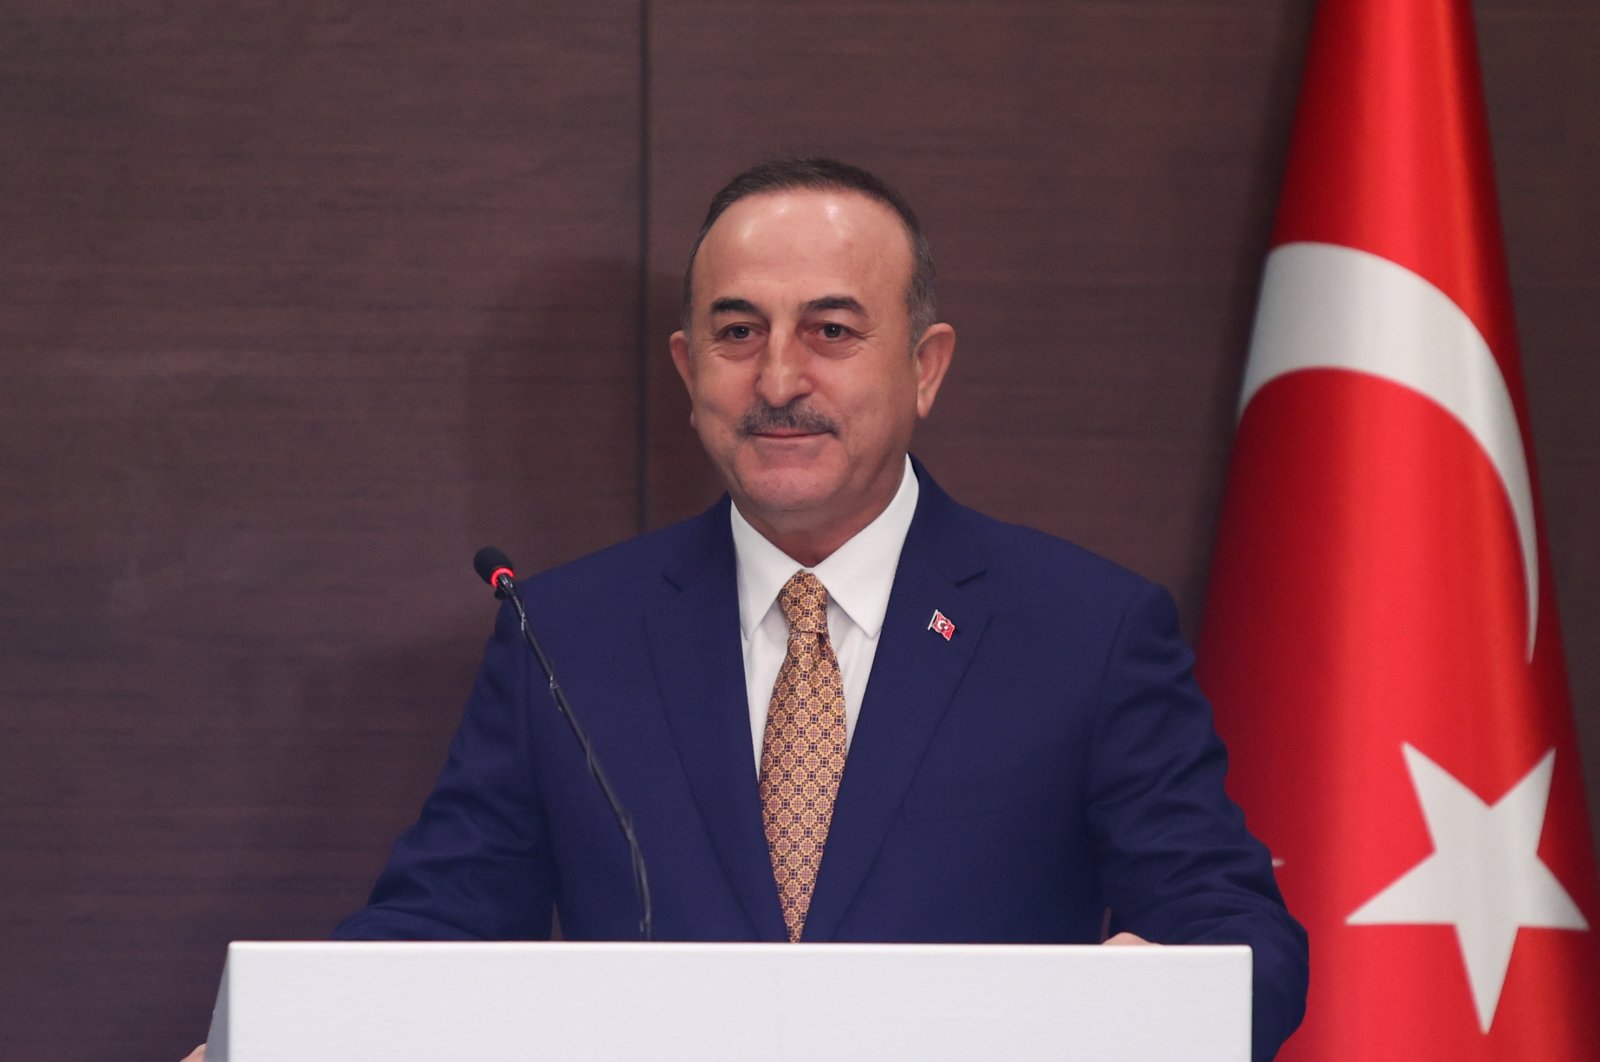 Foreign Minister Mevlüt Çavuşoğlu speaks at a joint news conference with Japanese counterpart Yoshimasa Hayashi in Antalya, Turkey, March 19, 2022. (AA Photo)